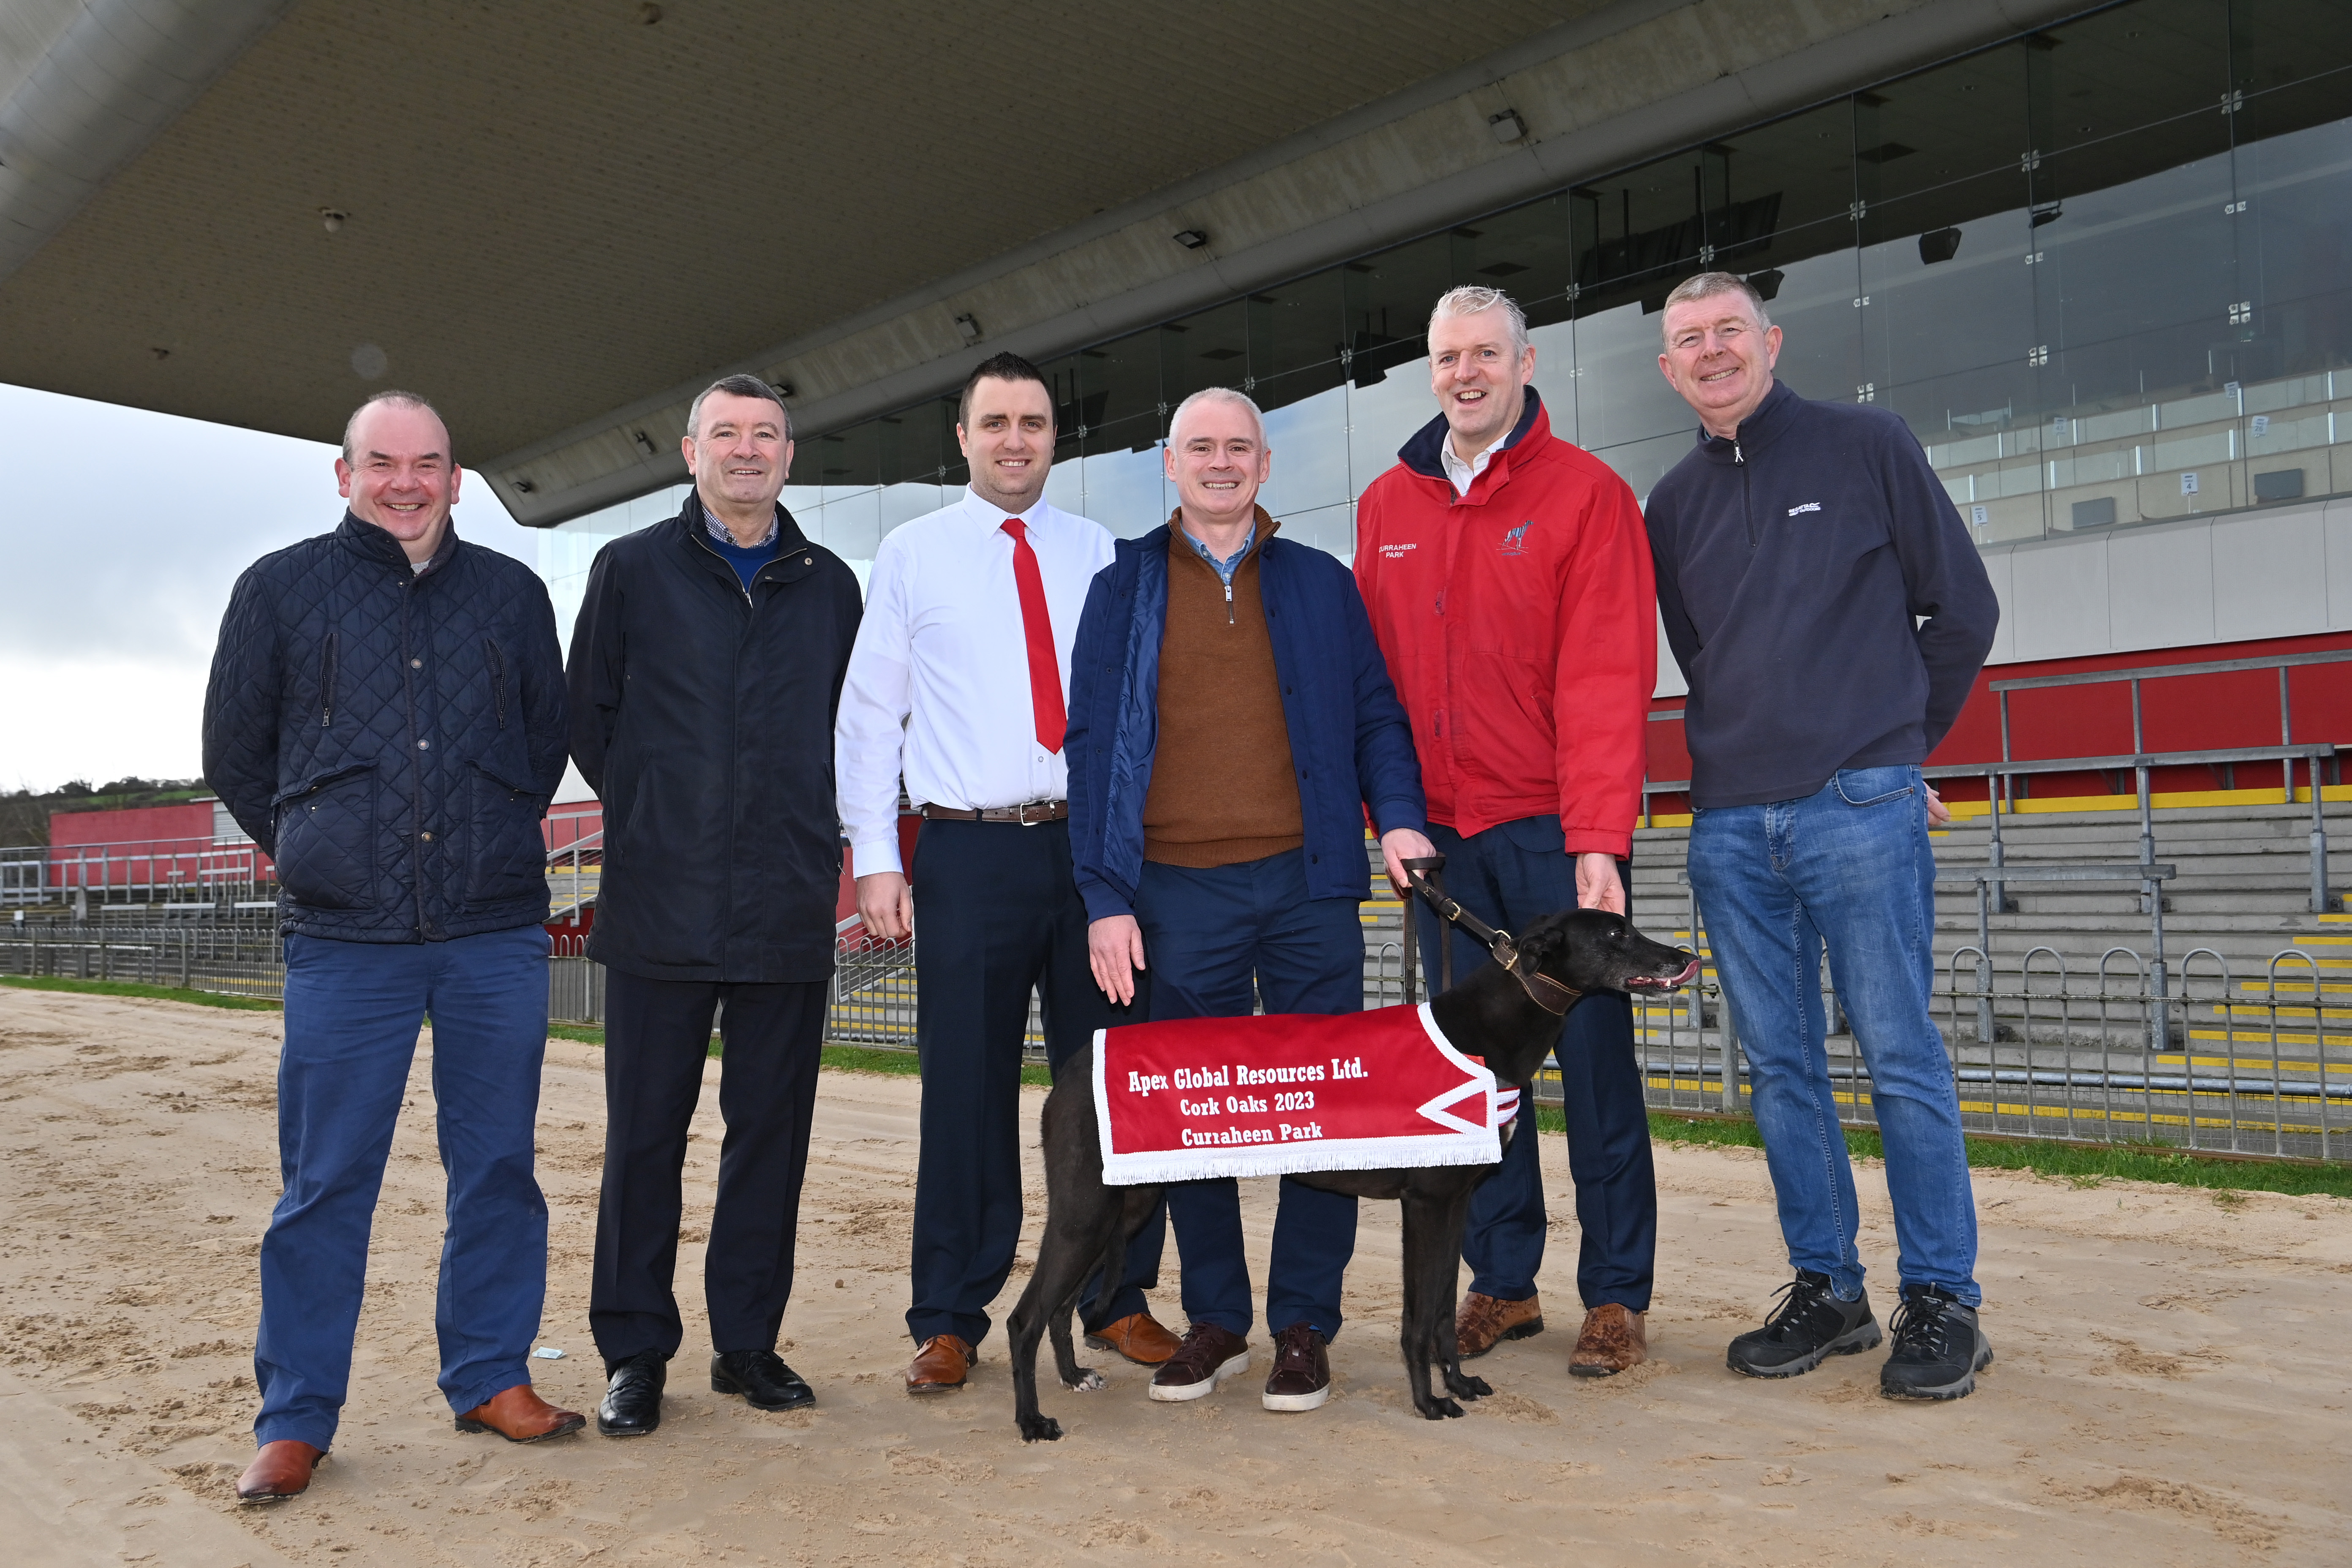 At the Curraheen Park Greyhound Stadium, Cork details were announced of this year's Apex Global Resources Ltd Cork Oaks which takes place from the 4th to the 18th of march. Included were from left, Paddy O'Donovan, Cork Supporters, Jimmy Barry-Murphy, Darren Hogan, Racing Support Officer, Curraheen Park, Sponsor Seanie McGrath, Apex Global Resources, Brian Collins, Racing Manager and Damien Holland, Cork Supporters.